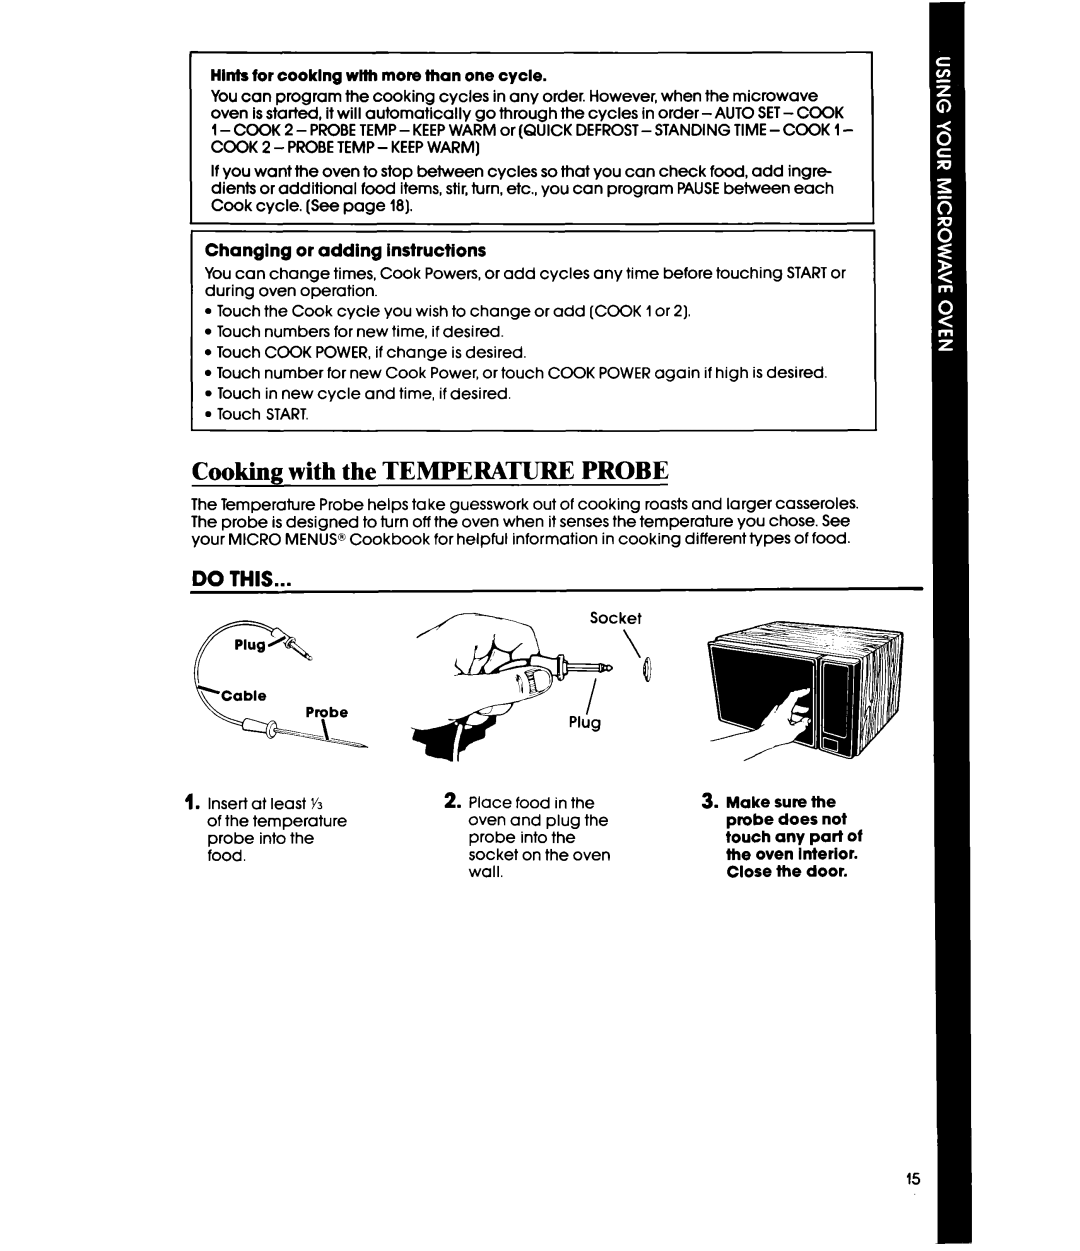 Whirlpool MW36OOXS manual Cooking with the TEMPERATURE PROBE, Do This, Changing or adding instructions 